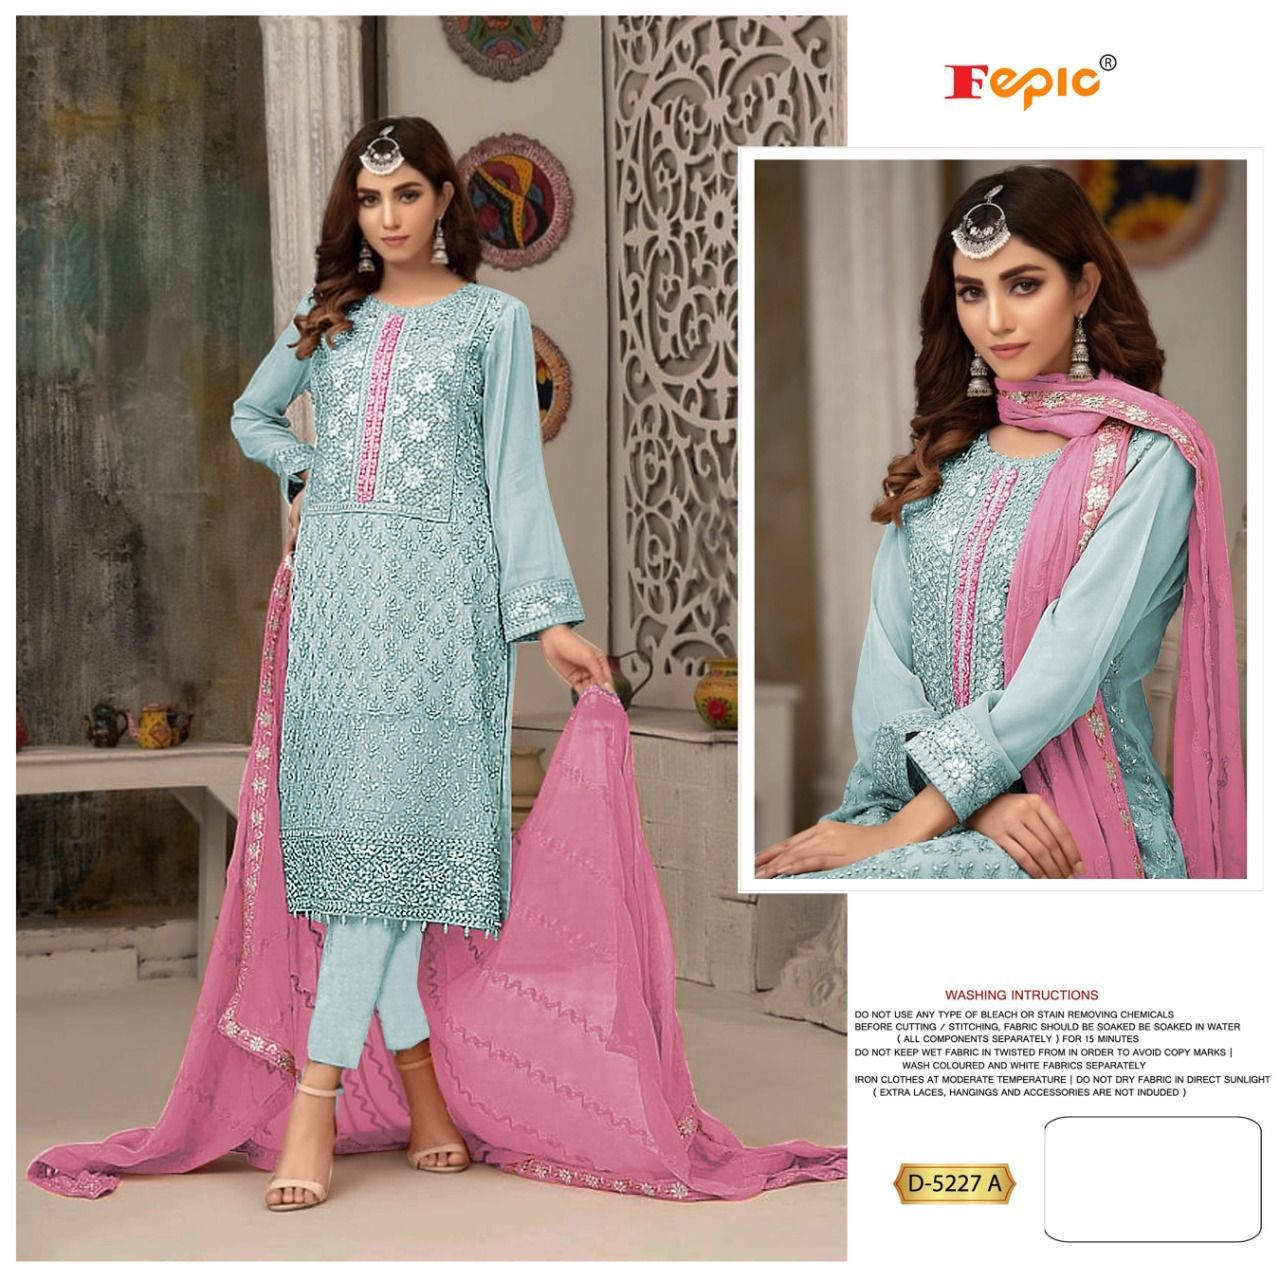 FEPIC D 5227 A ROSEMEEN PAKISTANI SUITS IN INDIA